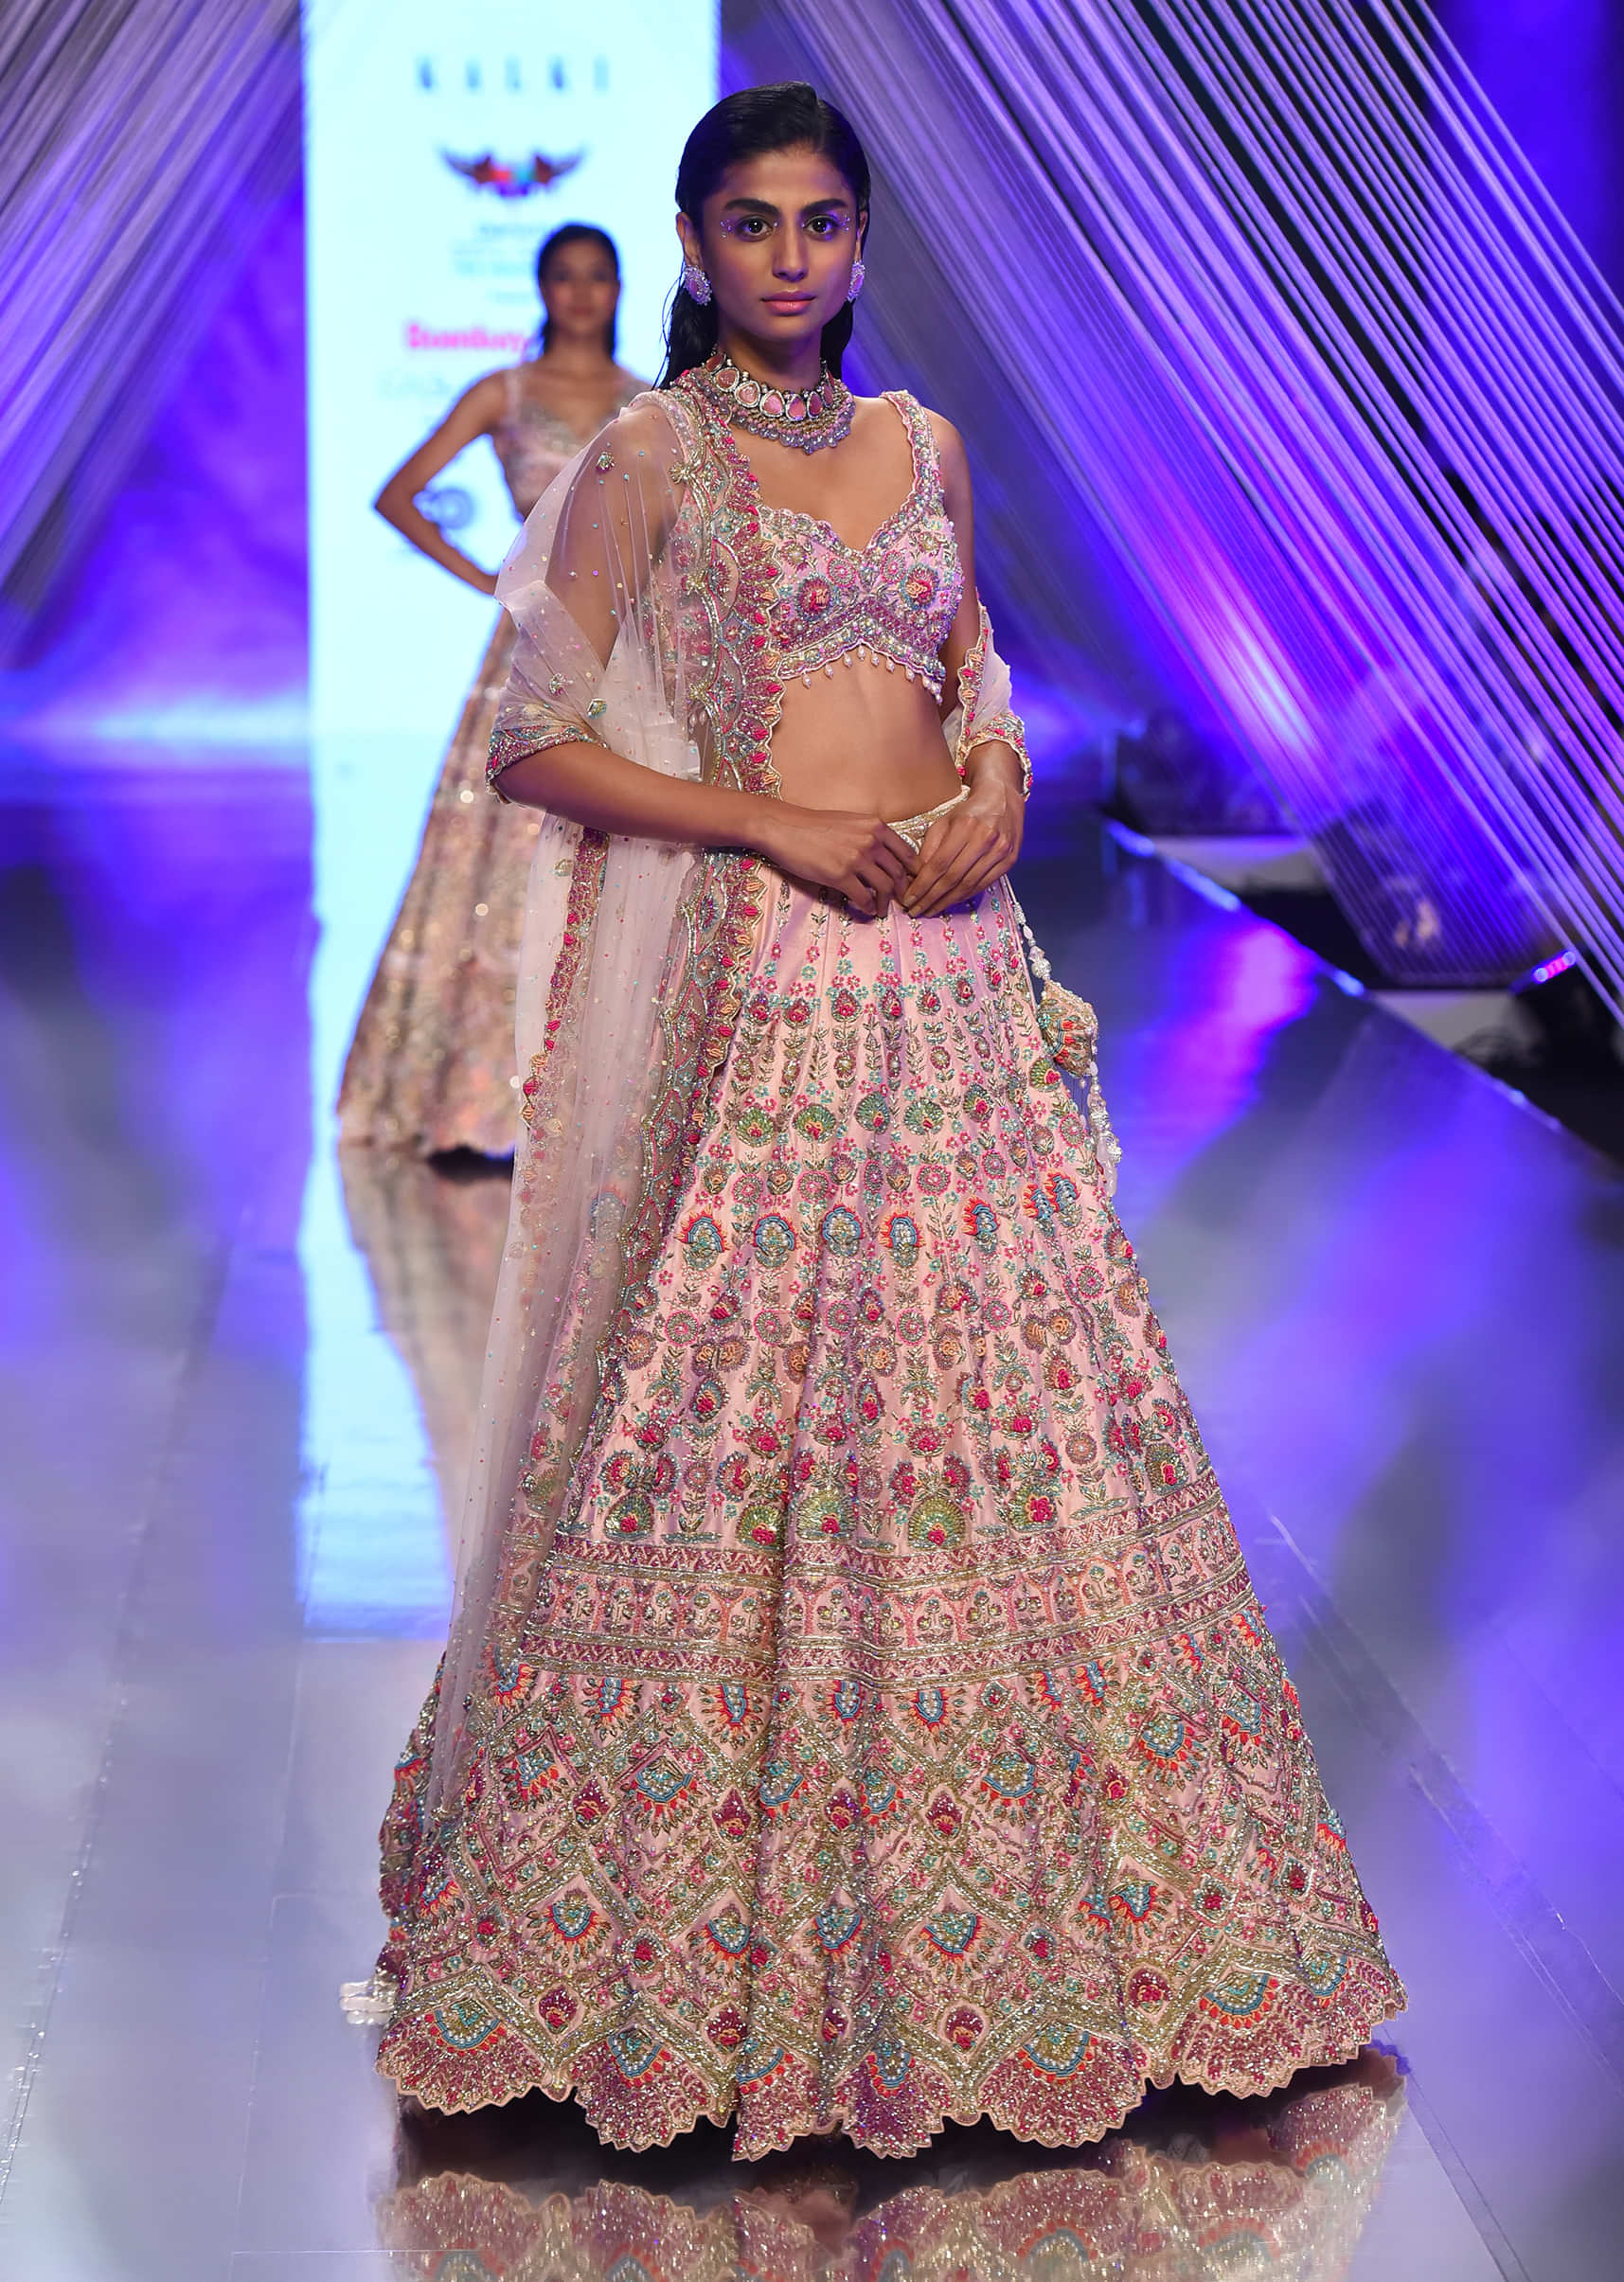 Pastel Pink Lehenga With A Crop Top In Multi-Colored Resham Embroidery, Crop Top Comes In Sleeveless With Scalloped Neckline